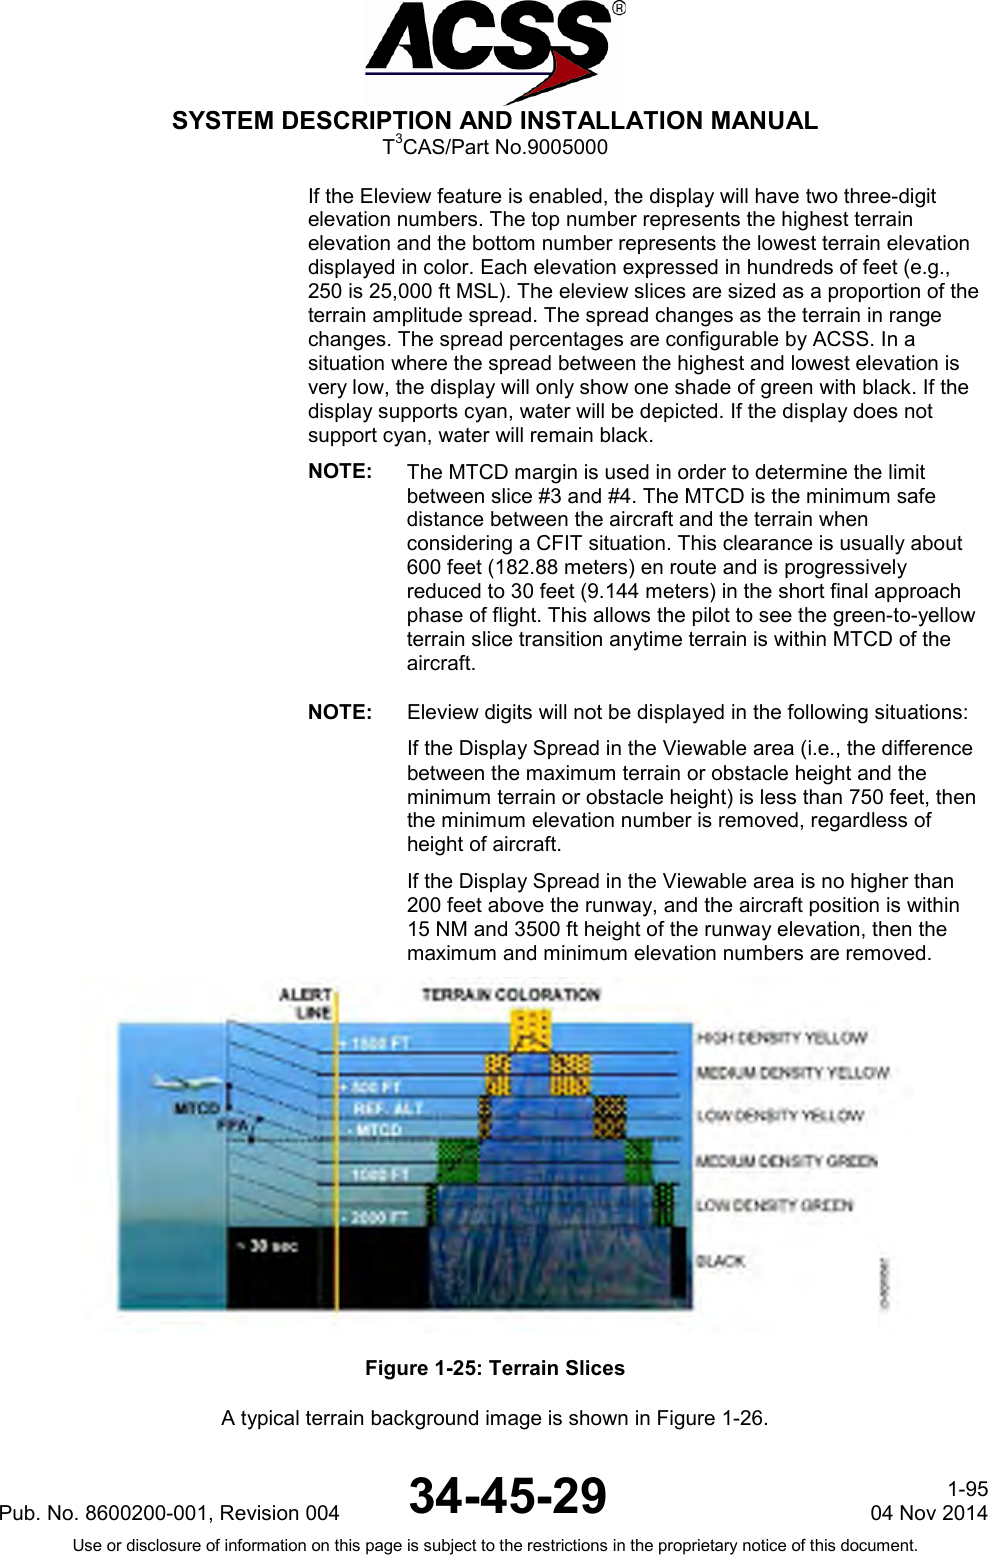  SYSTEM DESCRIPTION AND INSTALLATION MANUAL T3CAS/Part No.9005000 If the Eleview feature is enabled, the display will have two three-digit elevation numbers. The top number represents the highest terrain elevation and the bottom number represents the lowest terrain elevation displayed in color. Each elevation expressed in hundreds of feet (e.g., 250 is 25,000 ft MSL). The eleview slices are sized as a proportion of the terrain amplitude spread. The spread changes as the terrain in range changes. The spread percentages are configurable by ACSS. In a situation where the spread between the highest and lowest elevation is very low, the display will only show one shade of green with black. If the display supports cyan, water will be depicted. If the display does not support cyan, water will remain black. NOTE: The MTCD margin is used in order to determine the limit between slice #3 and #4. The MTCD is the minimum safe distance between the aircraft and the terrain when considering a CFIT situation. This clearance is usually about 600 feet (182.88 meters) en route and is progressively reduced to 30 feet (9.144 meters) in the short final approach phase of flight. This allows the pilot to see the green-to-yellow terrain slice transition anytime terrain is within MTCD of the aircraft. NOTE: Eleview digits will not be displayed in the following situations:    If the Display Spread in the Viewable area (i.e., the difference between the maximum terrain or obstacle height and the minimum terrain or obstacle height) is less than 750 feet, then the minimum elevation number is removed, regardless of height of aircraft. If the Display Spread in the Viewable area is no higher than 200 feet above the runway, and the aircraft position is within 15 NM and 3500 ft height of the runway elevation, then the maximum and minimum elevation numbers are removed.  Figure 1-25: Terrain Slices A typical terrain background image is shown in Figure 1-26. Pub. No. 8600200-001, Revision 004 34-45-29 1-95 04 Nov 2014 Use or disclosure of information on this page is subject to the restrictions in the proprietary notice of this document.  